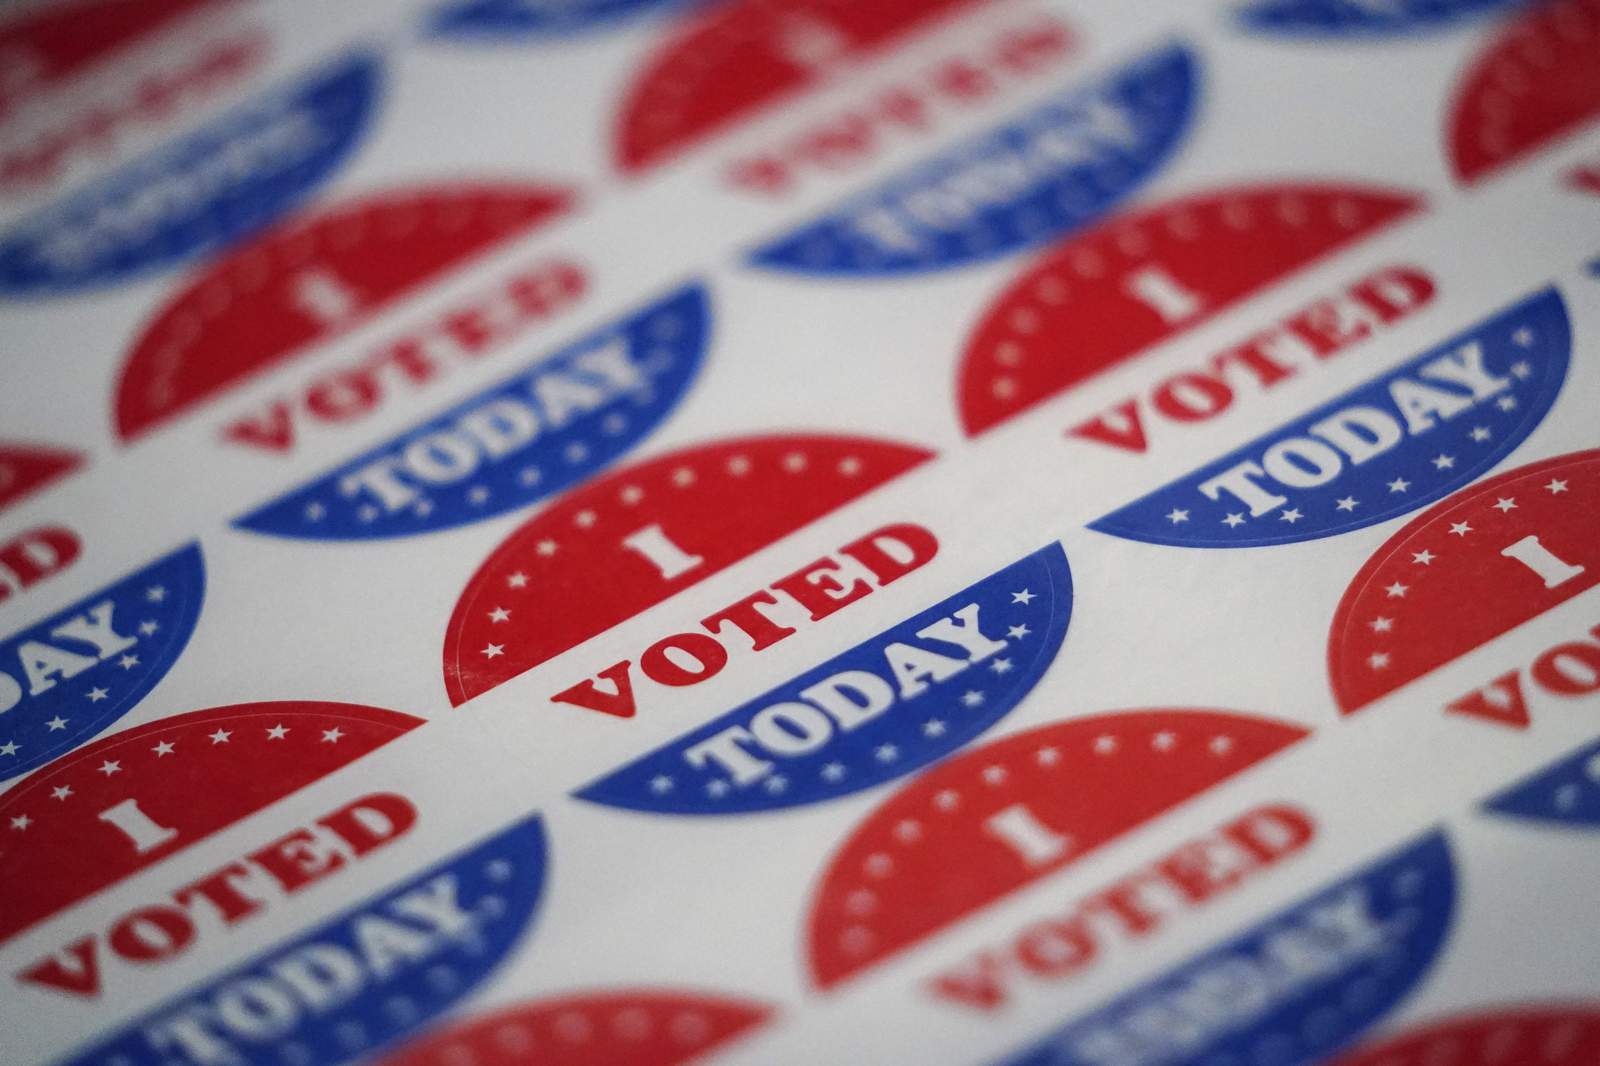 Election Day 2020: What to know before voting in Michigan